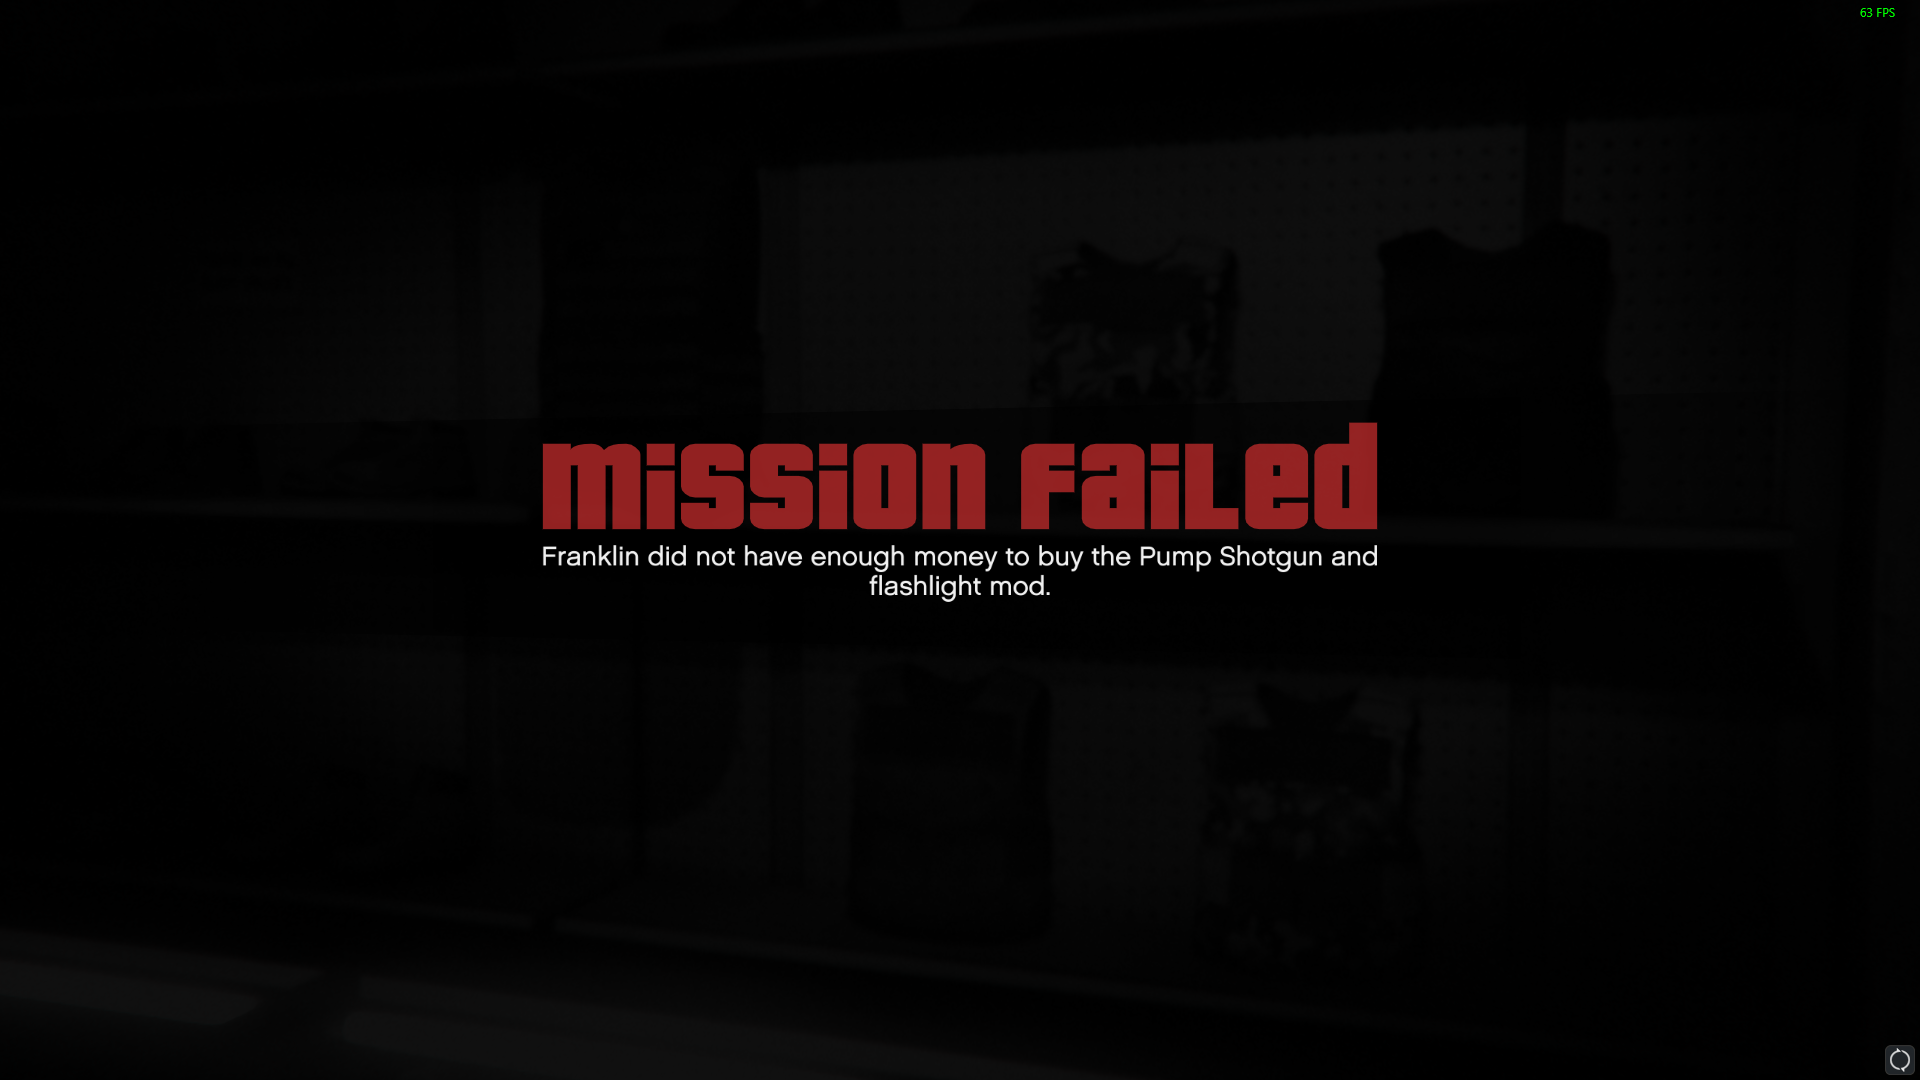 darkness - mission failed Franklin did not have enough money to buy the Pump Shotgun and flashlight mod